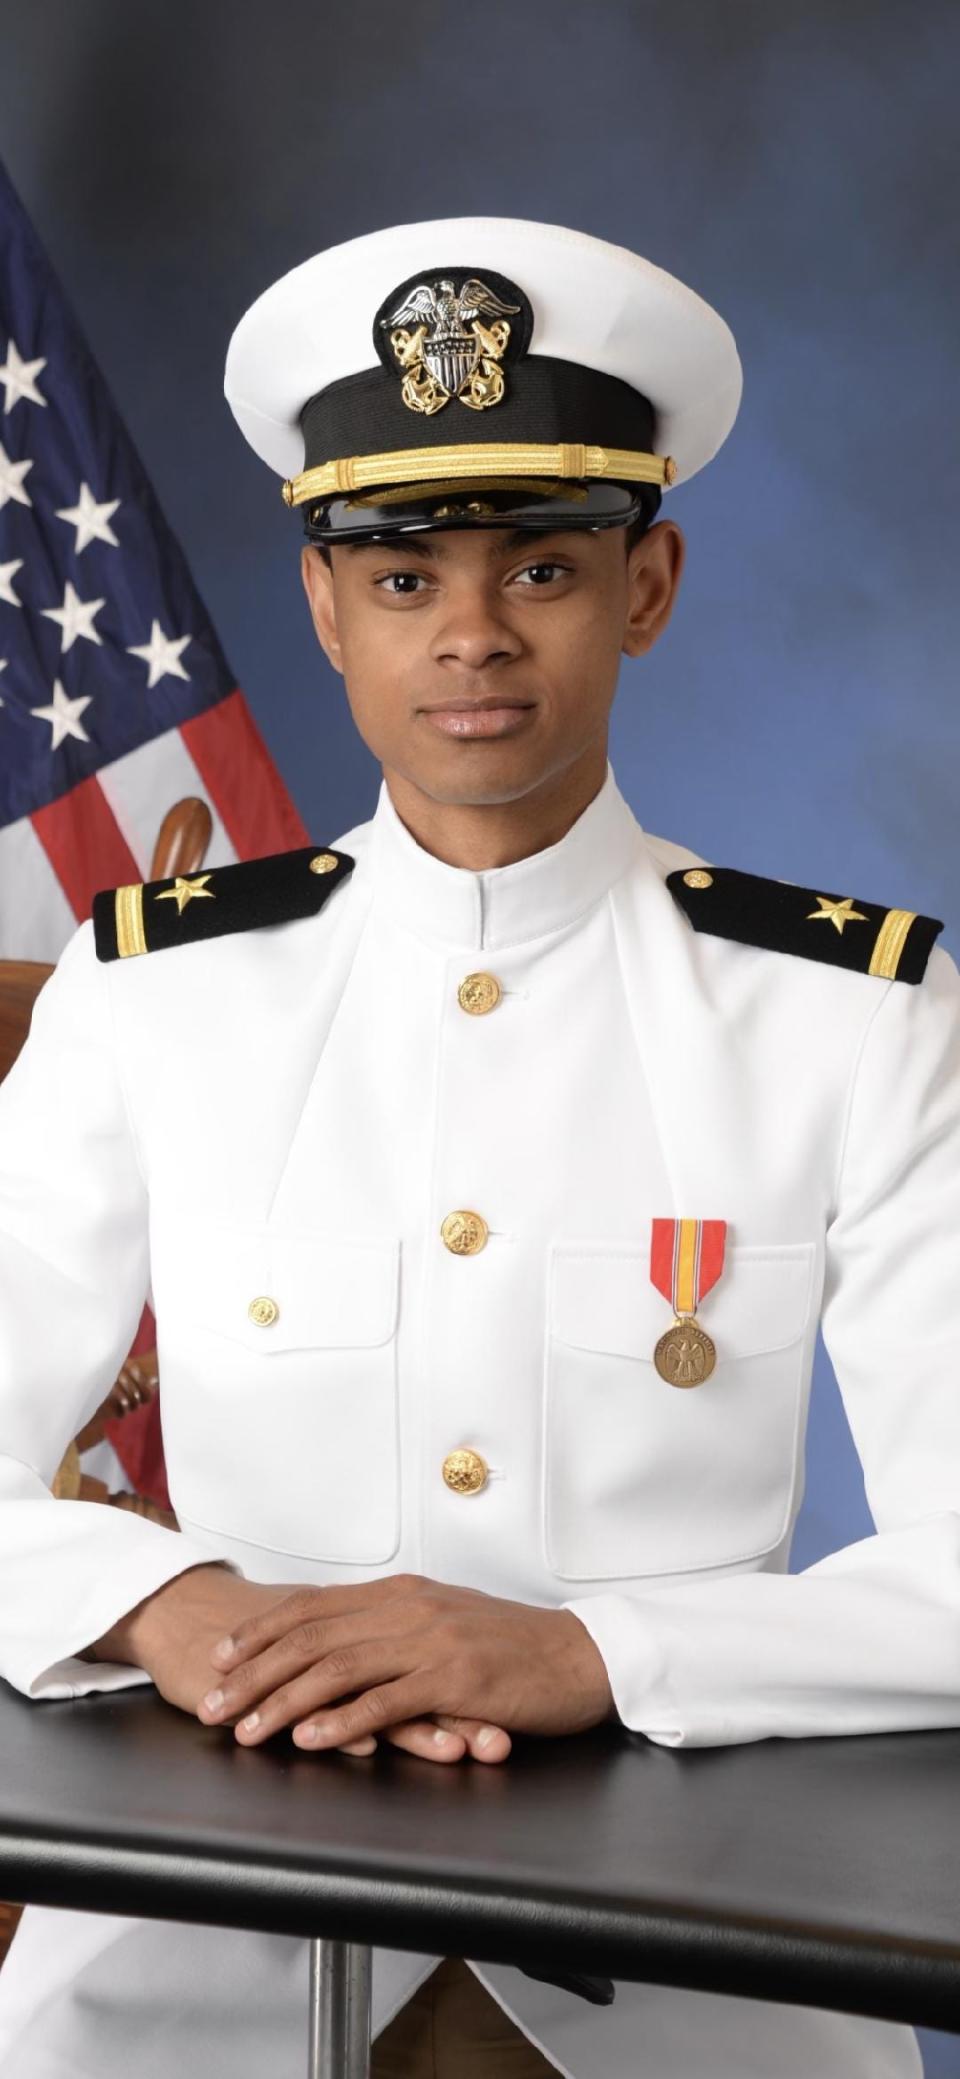 Former Barnstable Public Schools student Devon Harris is being honored for his perfect attendance through graduation in 2017. Harris is currently in the U.S. Navy.